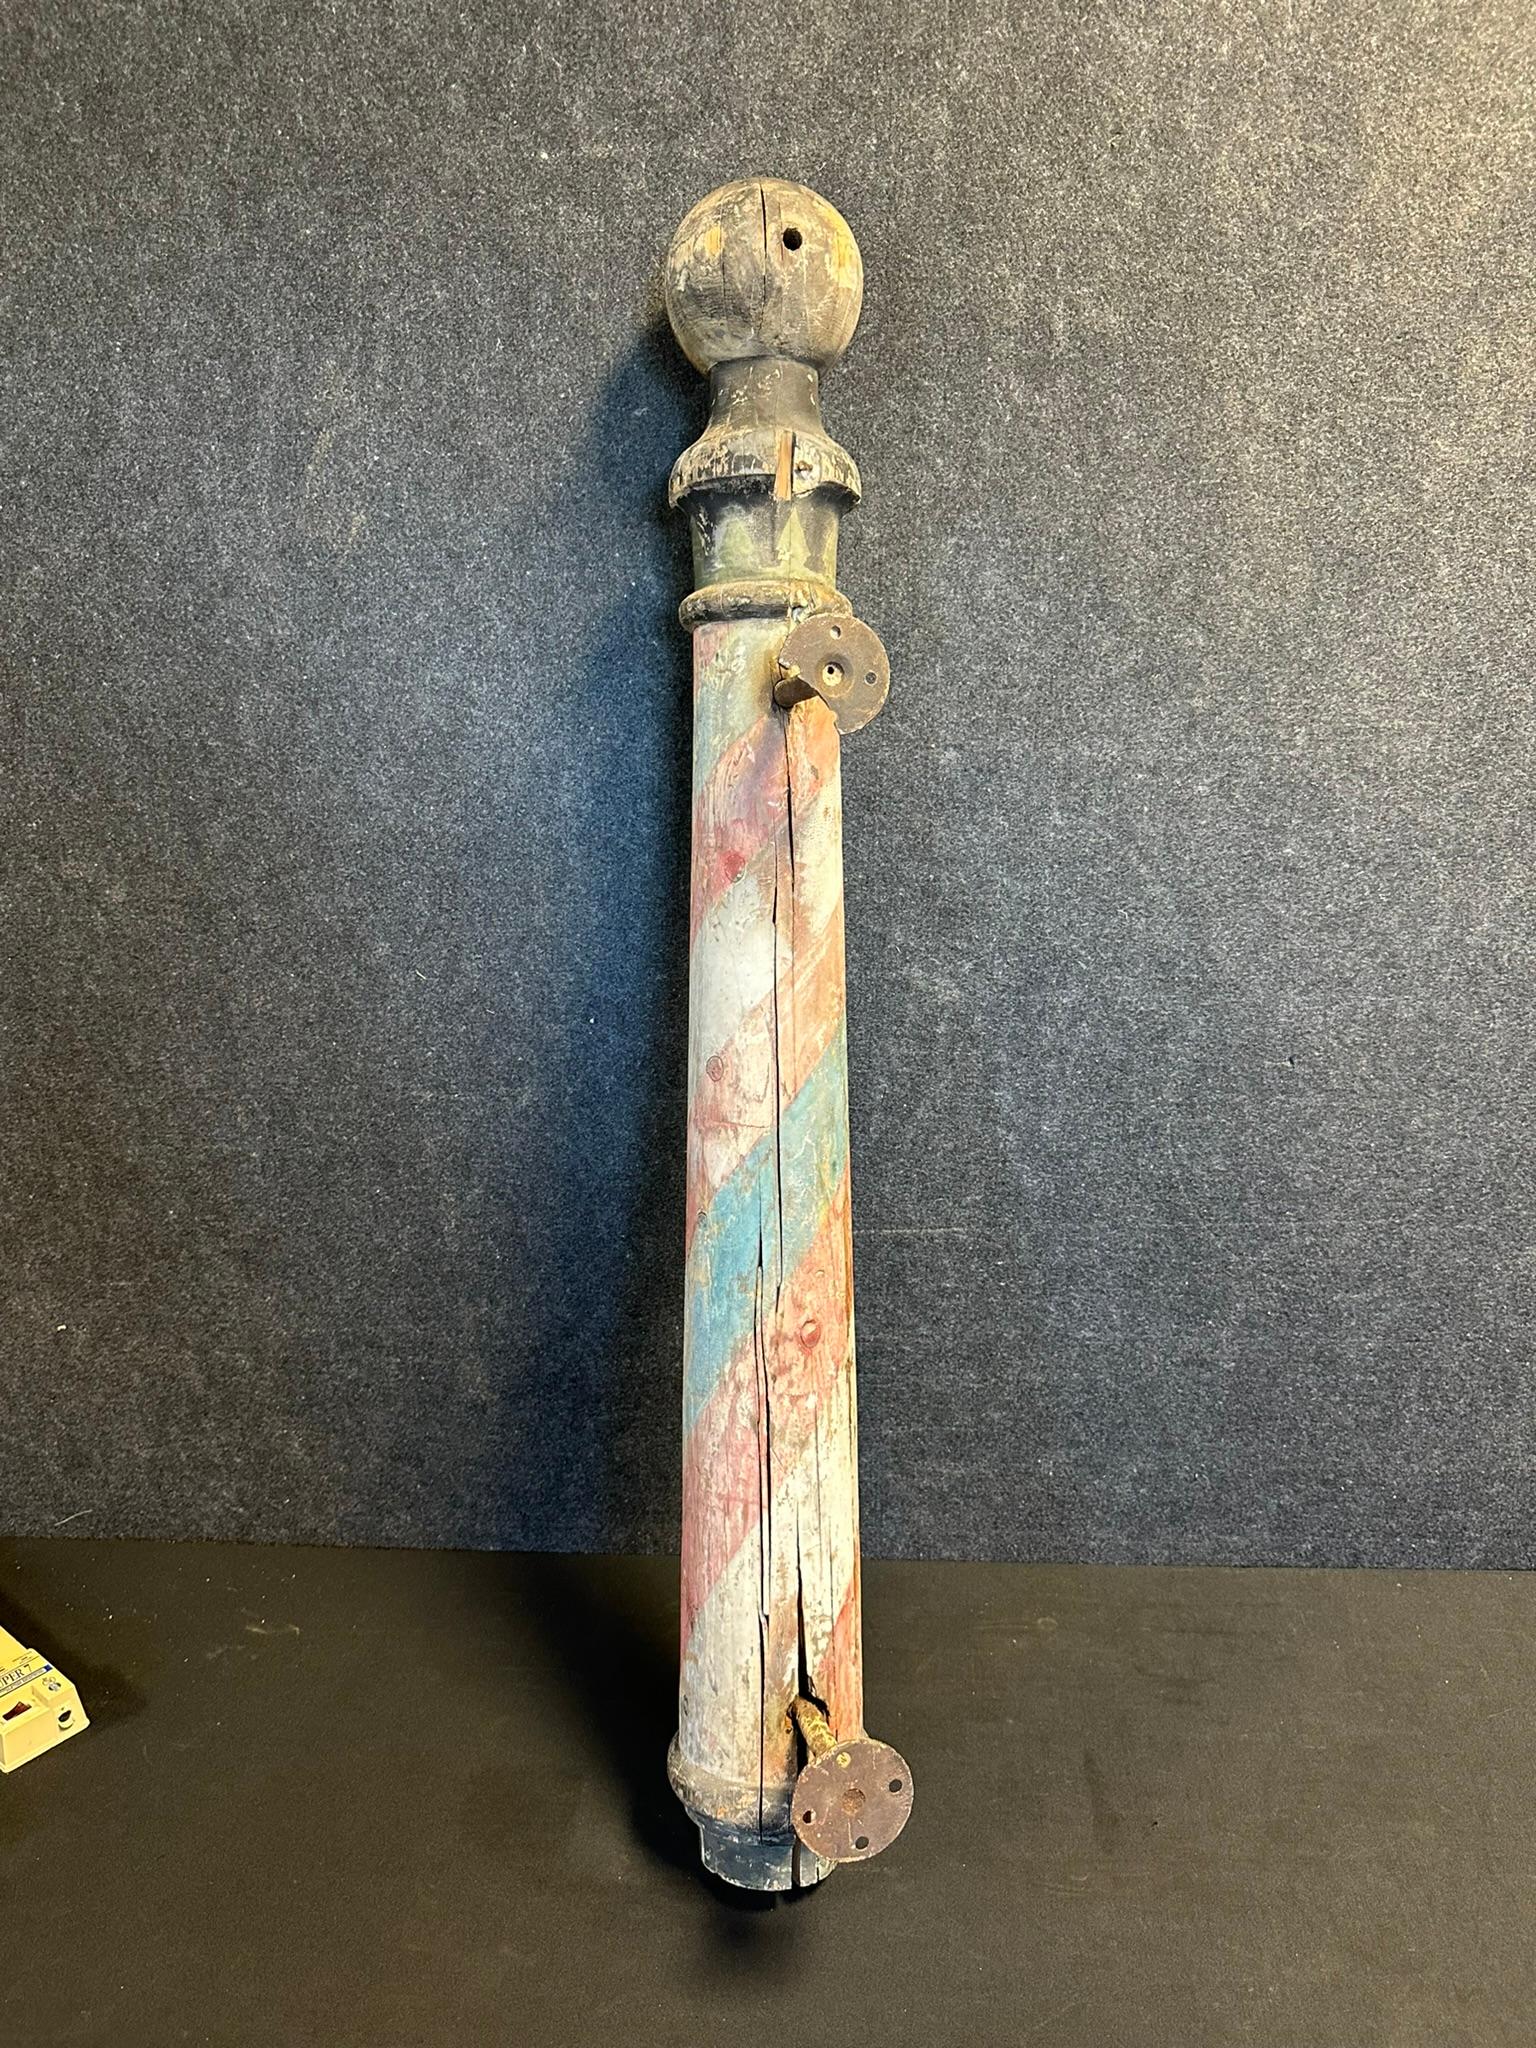 Antique Late 1890s Original Wooden Hand Painted Barber Shop Pole